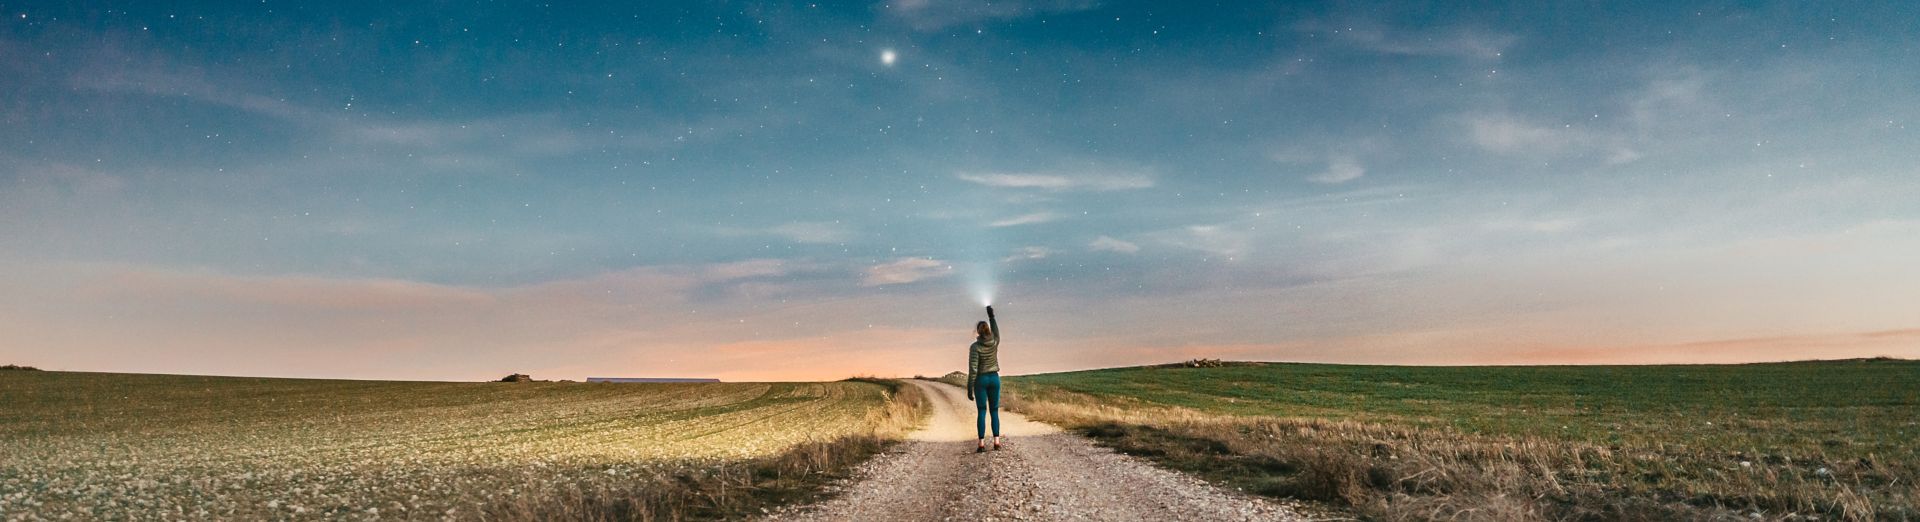 Woman walking down a dirt road at sunset, pointing at the stars with a flashlight